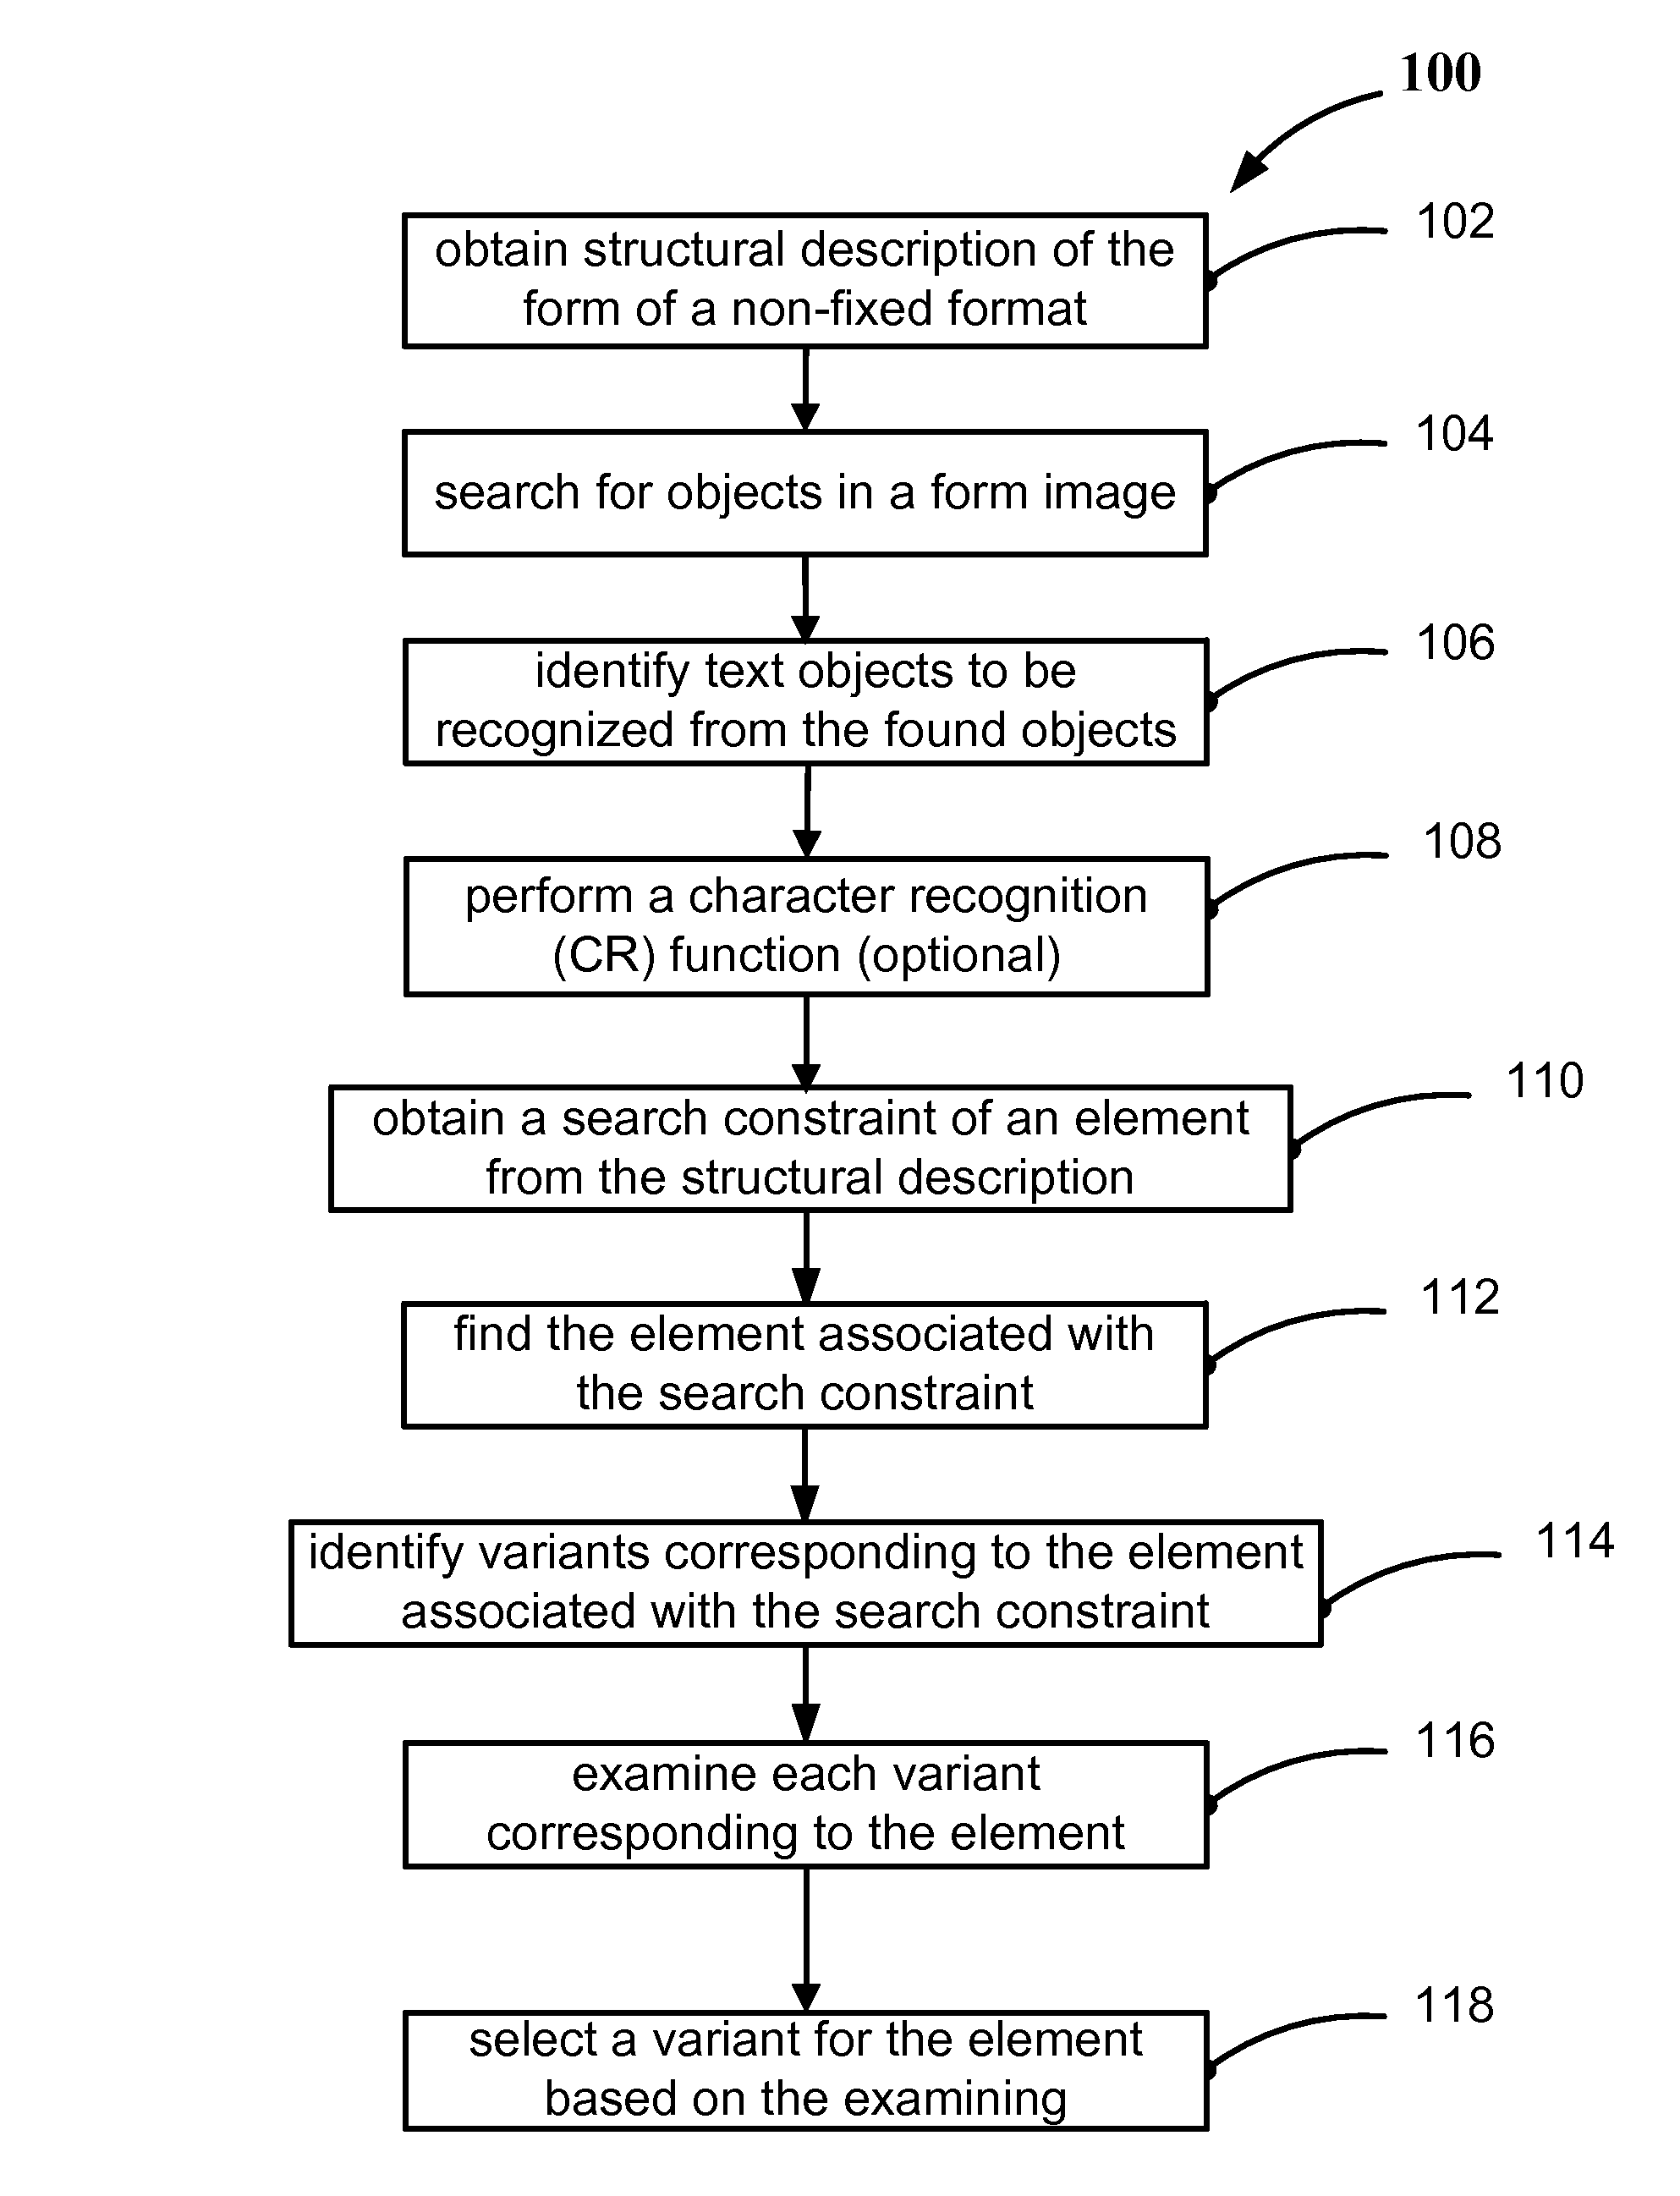 Object recognition and describing structure of graphical objects